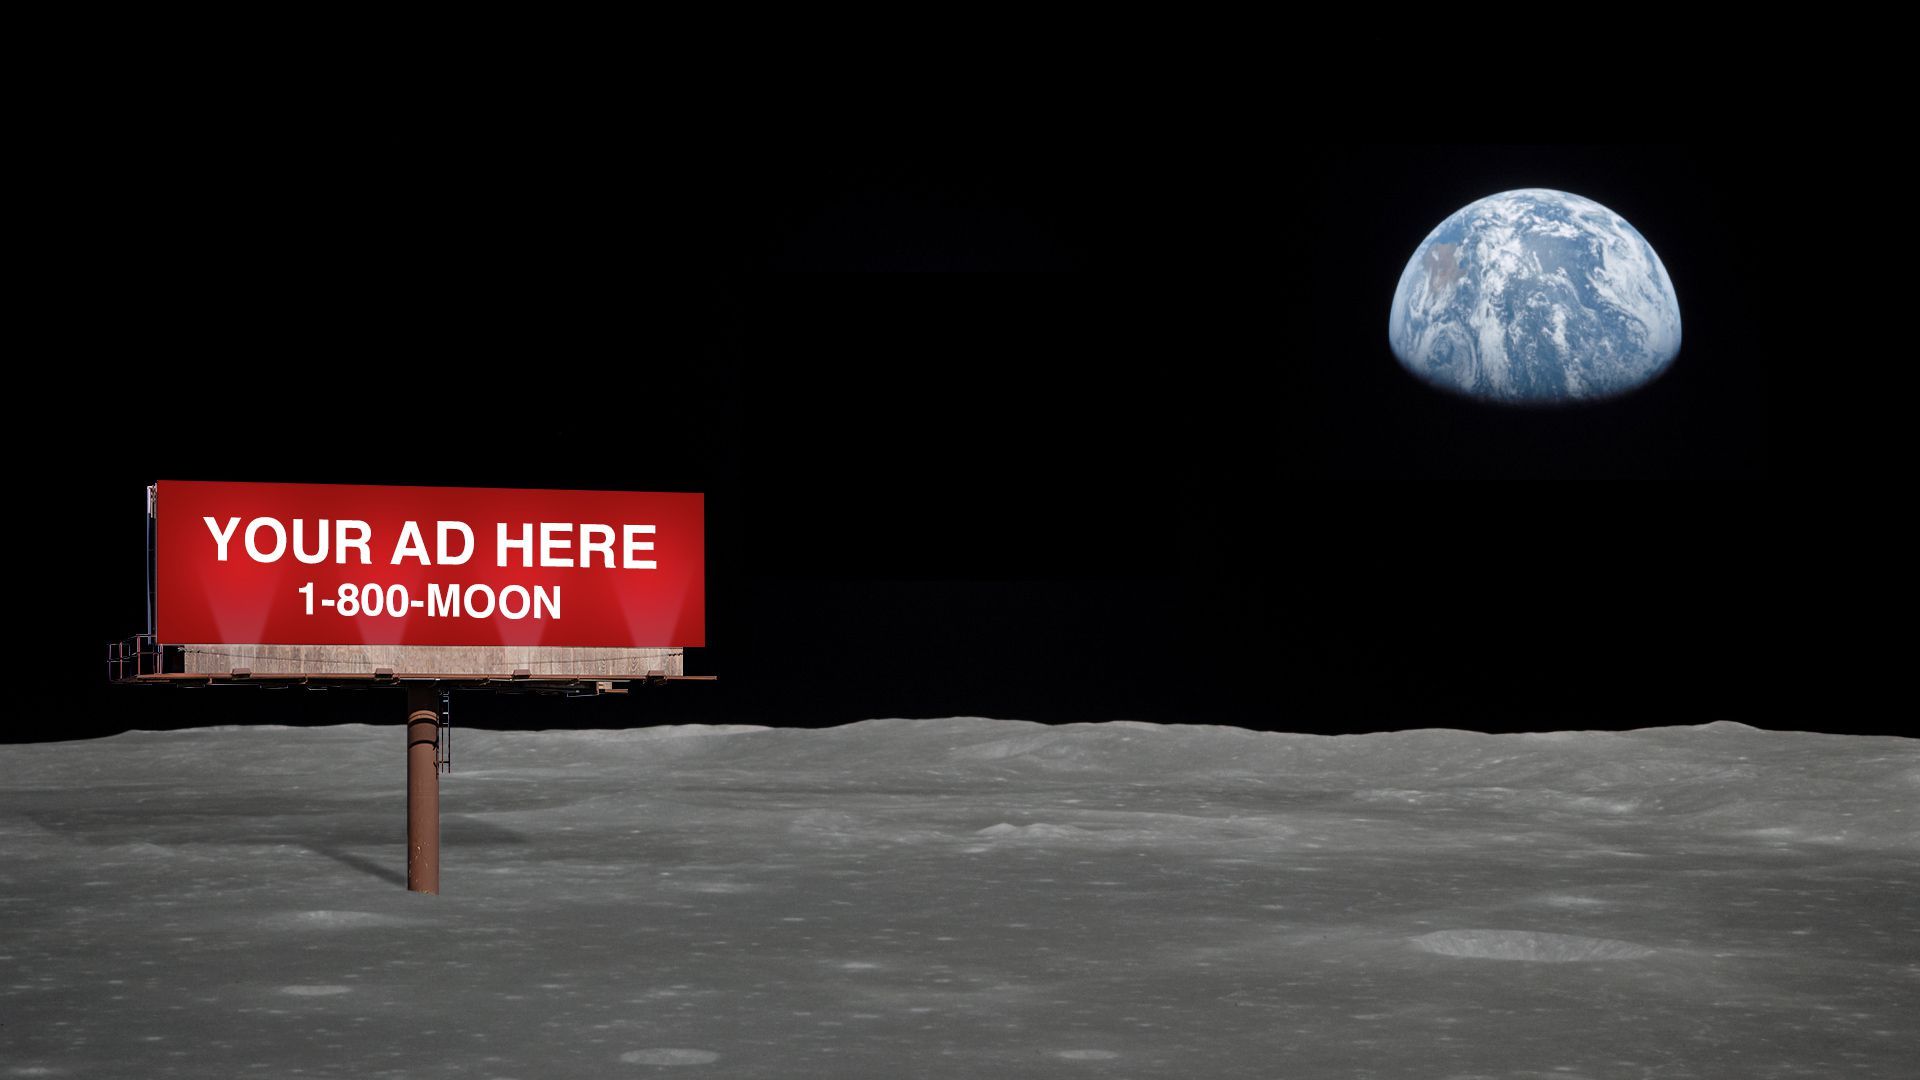 Illustration of the surface of the Moon with a billboard that reads, "Your Ad Here, 1-800-MOON".